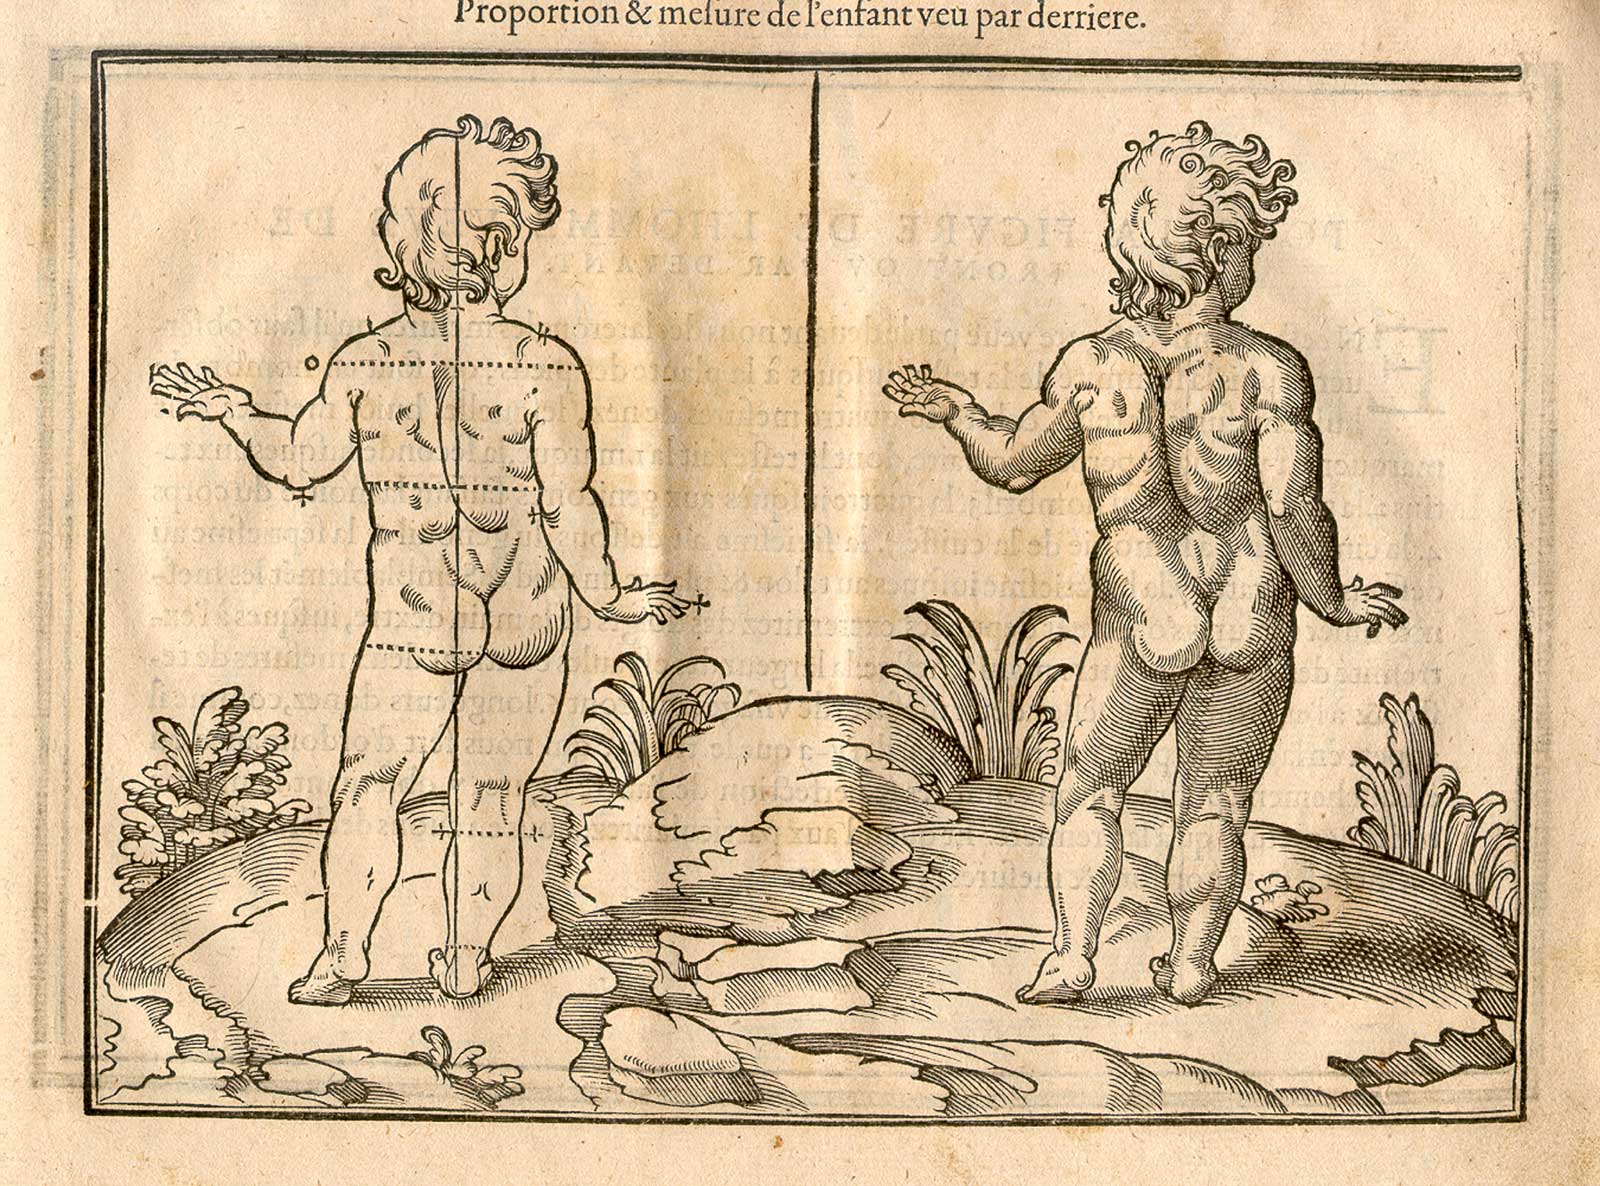 Woodcut illustration of two nude male child anatomical figures viewed from behind, both images in identical poses facing slightly to the left in a pastoral setting, with the left hand image showing the proportions of the figure measured out, from Jehan Cousin’s Livre de pourtraiture, NLM Call no.: WZ 250 C8673L 1608.